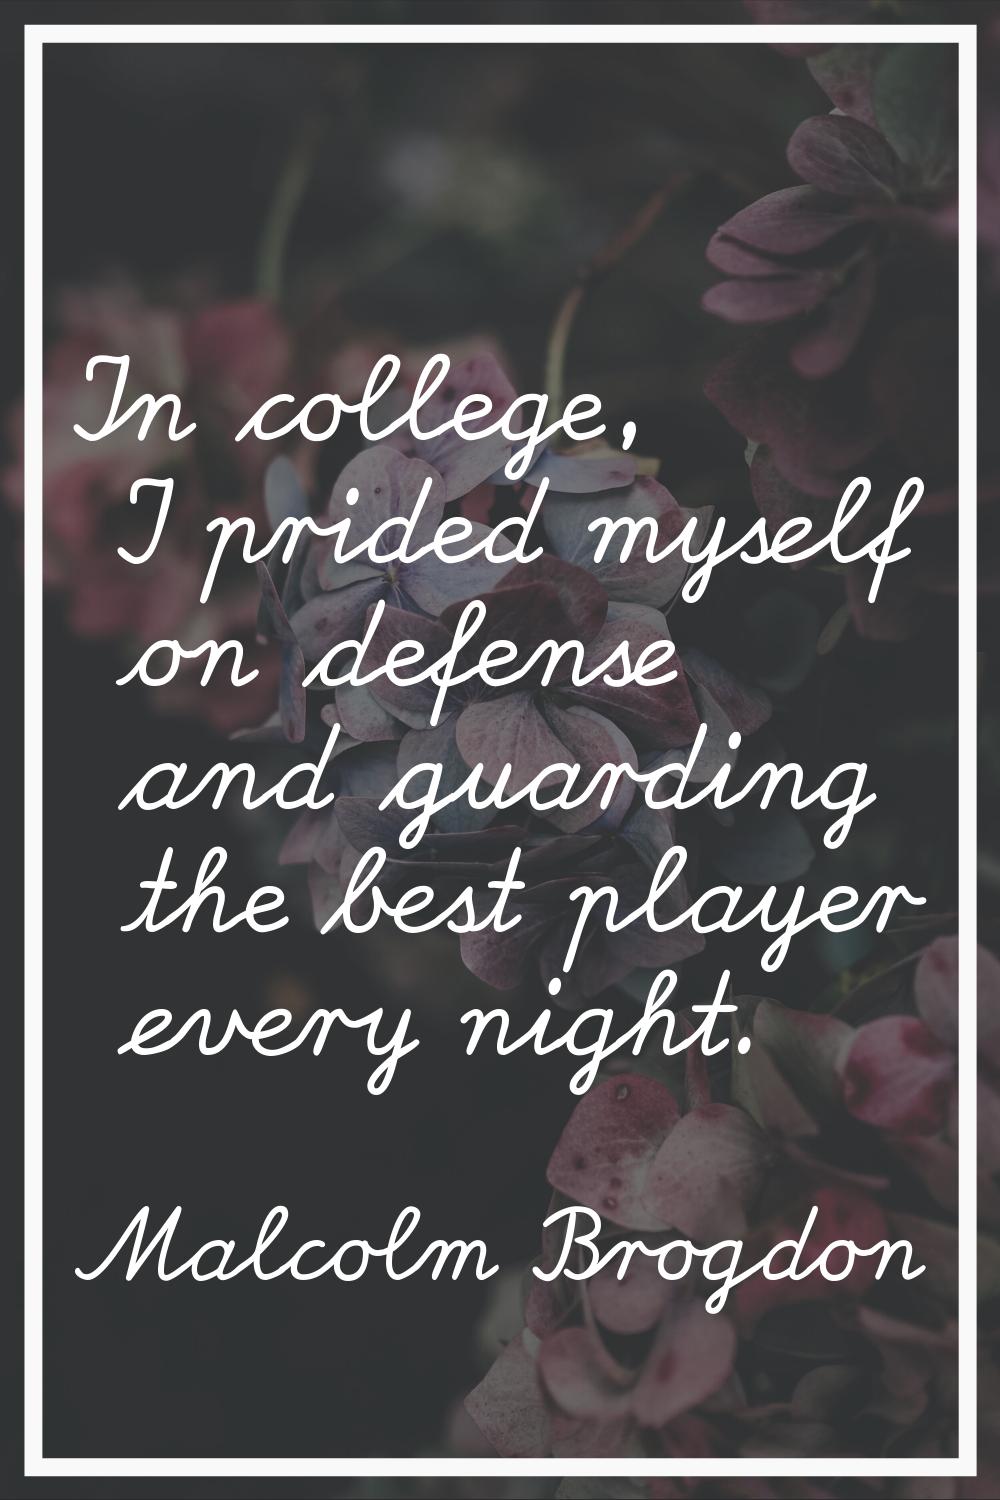 In college, I prided myself on defense and guarding the best player every night.